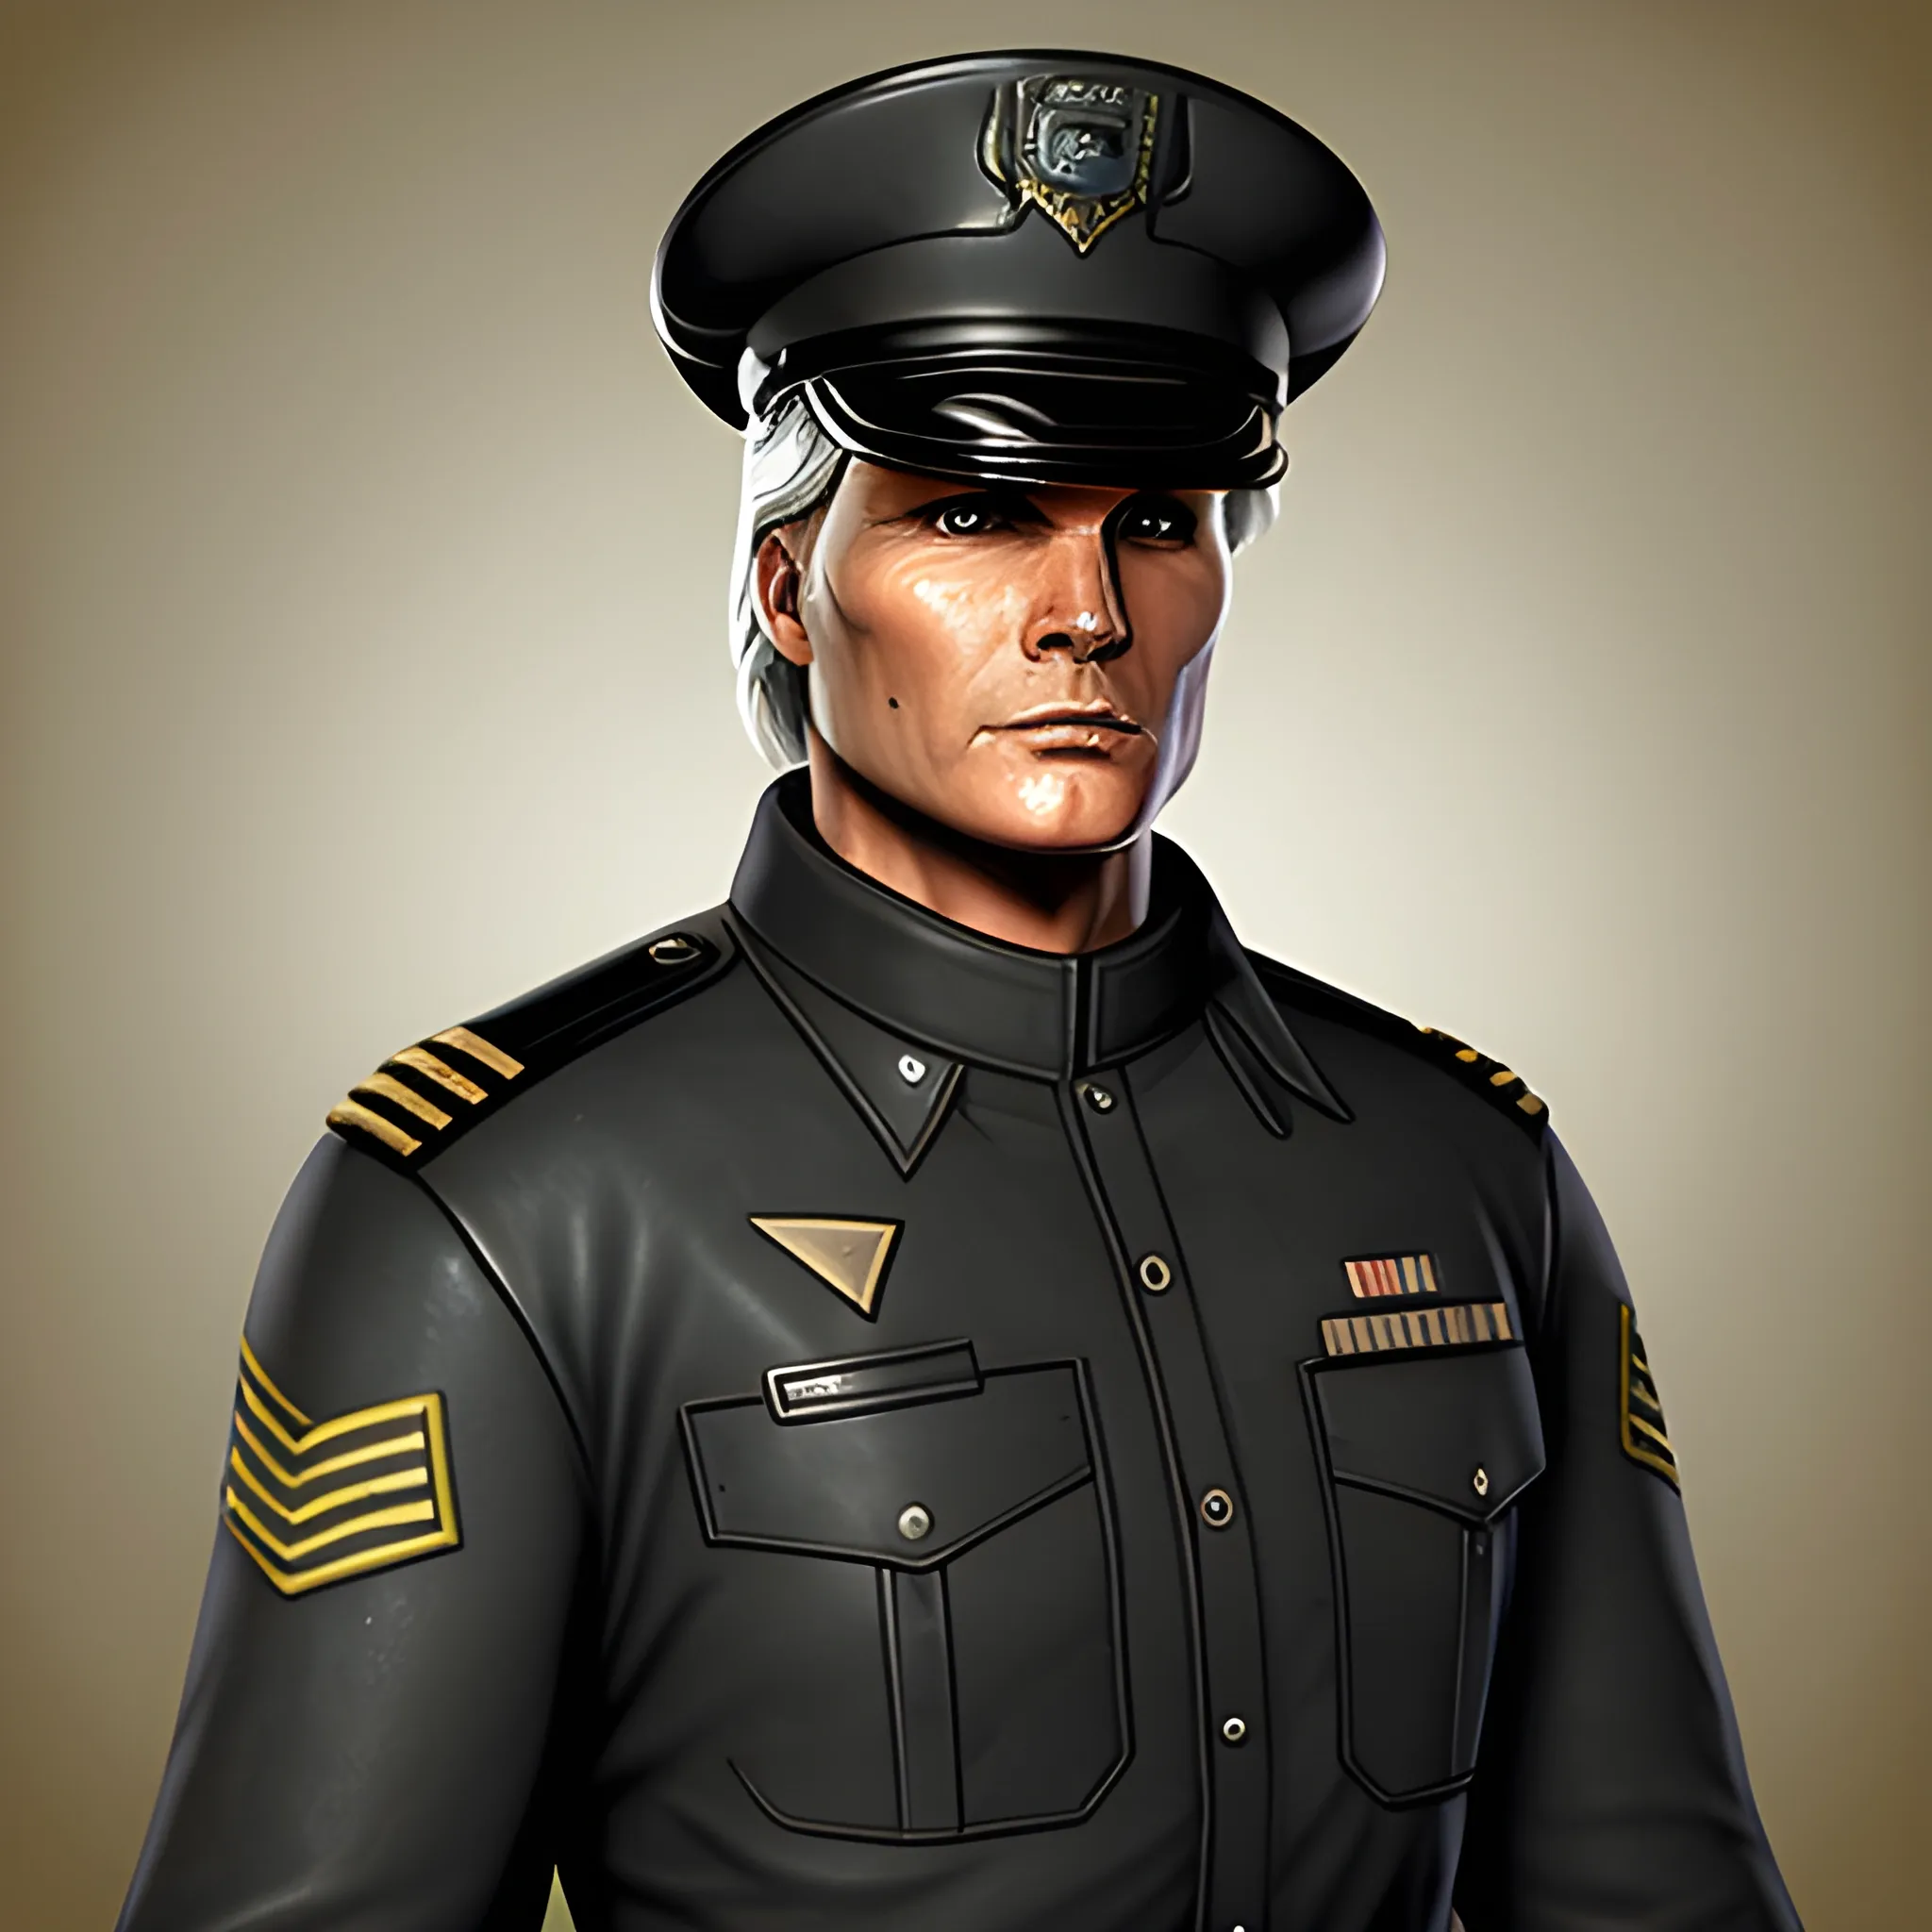 In the style of Fallout 4, masterpiece, Richard Dean Anderson from 1985 as an Enclave officer in a crisp black uniform complete with officers hat